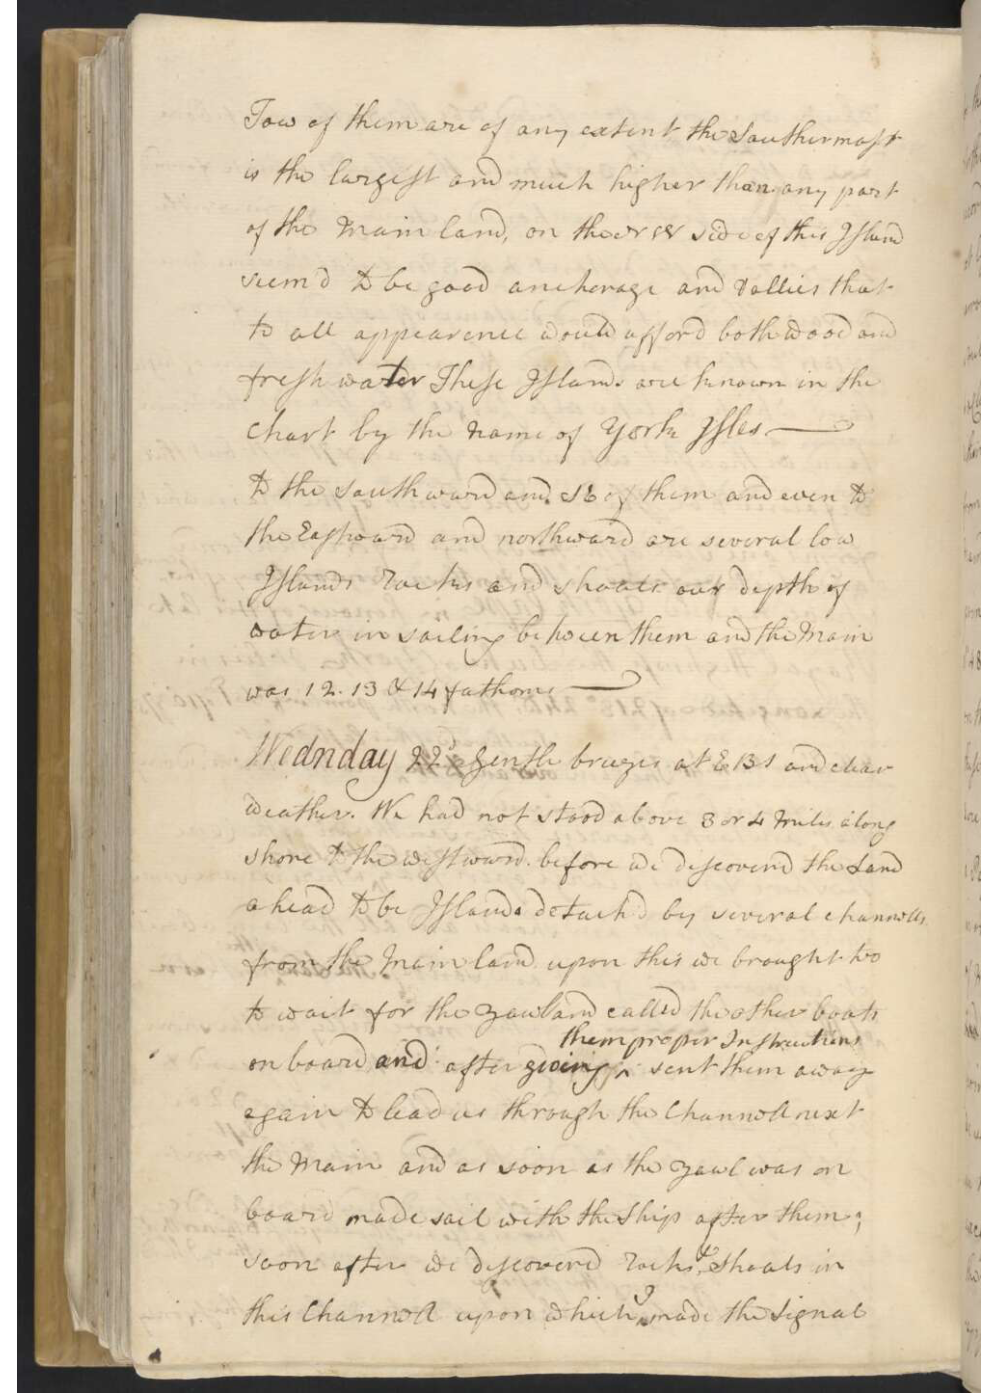 Image of Lt Cook's Endeavour Journal 21-22 August 1770 Possession Island - Courtesy of the National Library of Australia